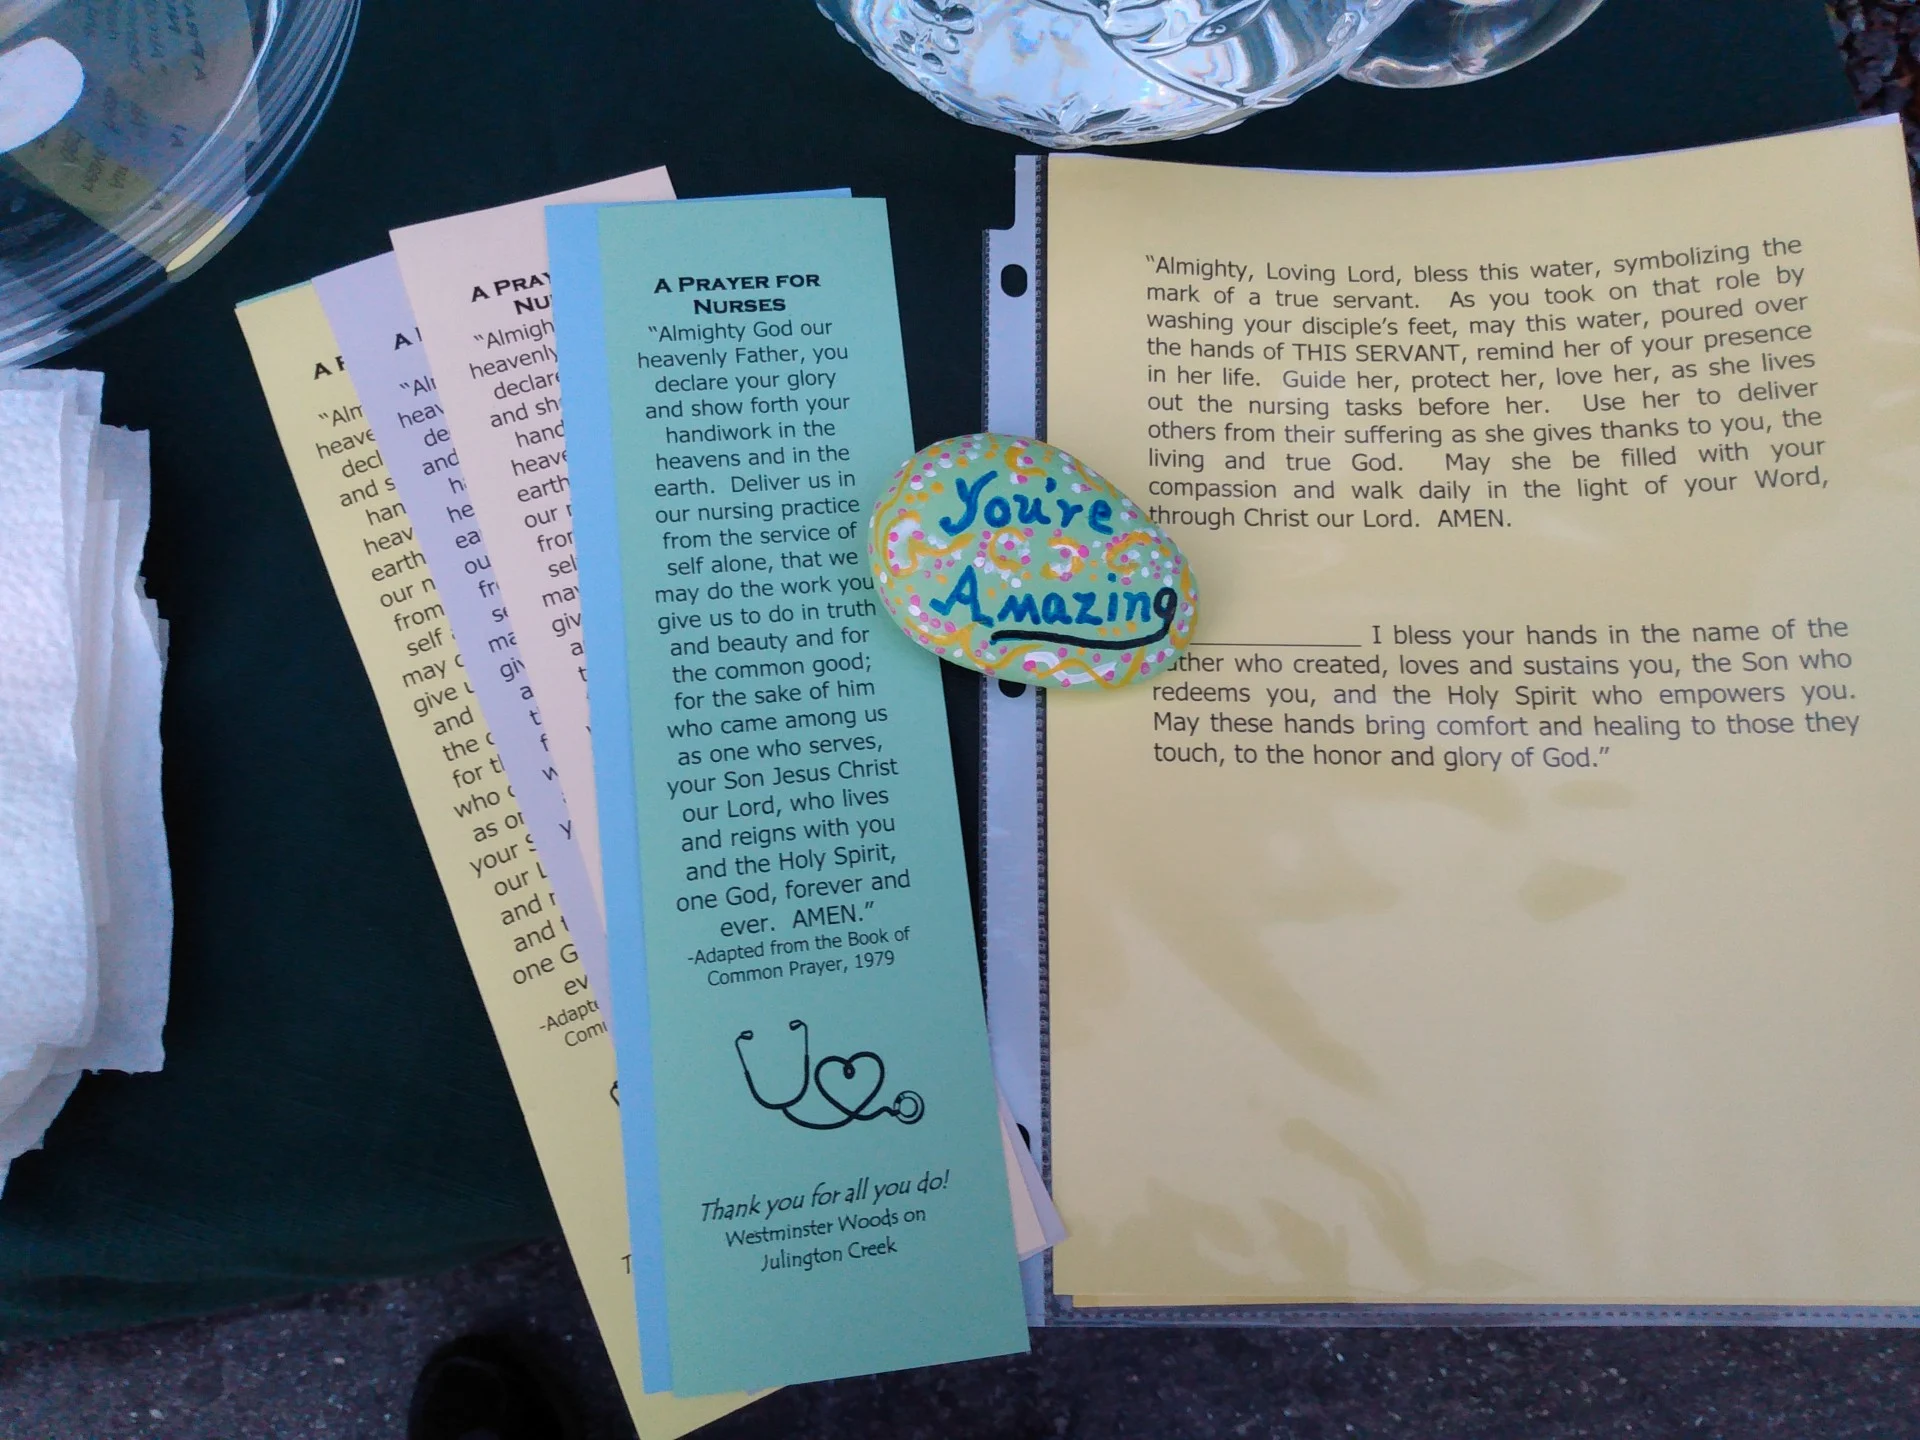 Chaplain's cart with printed prayers to hand out and a stone painted with the saying "You're Amazing".